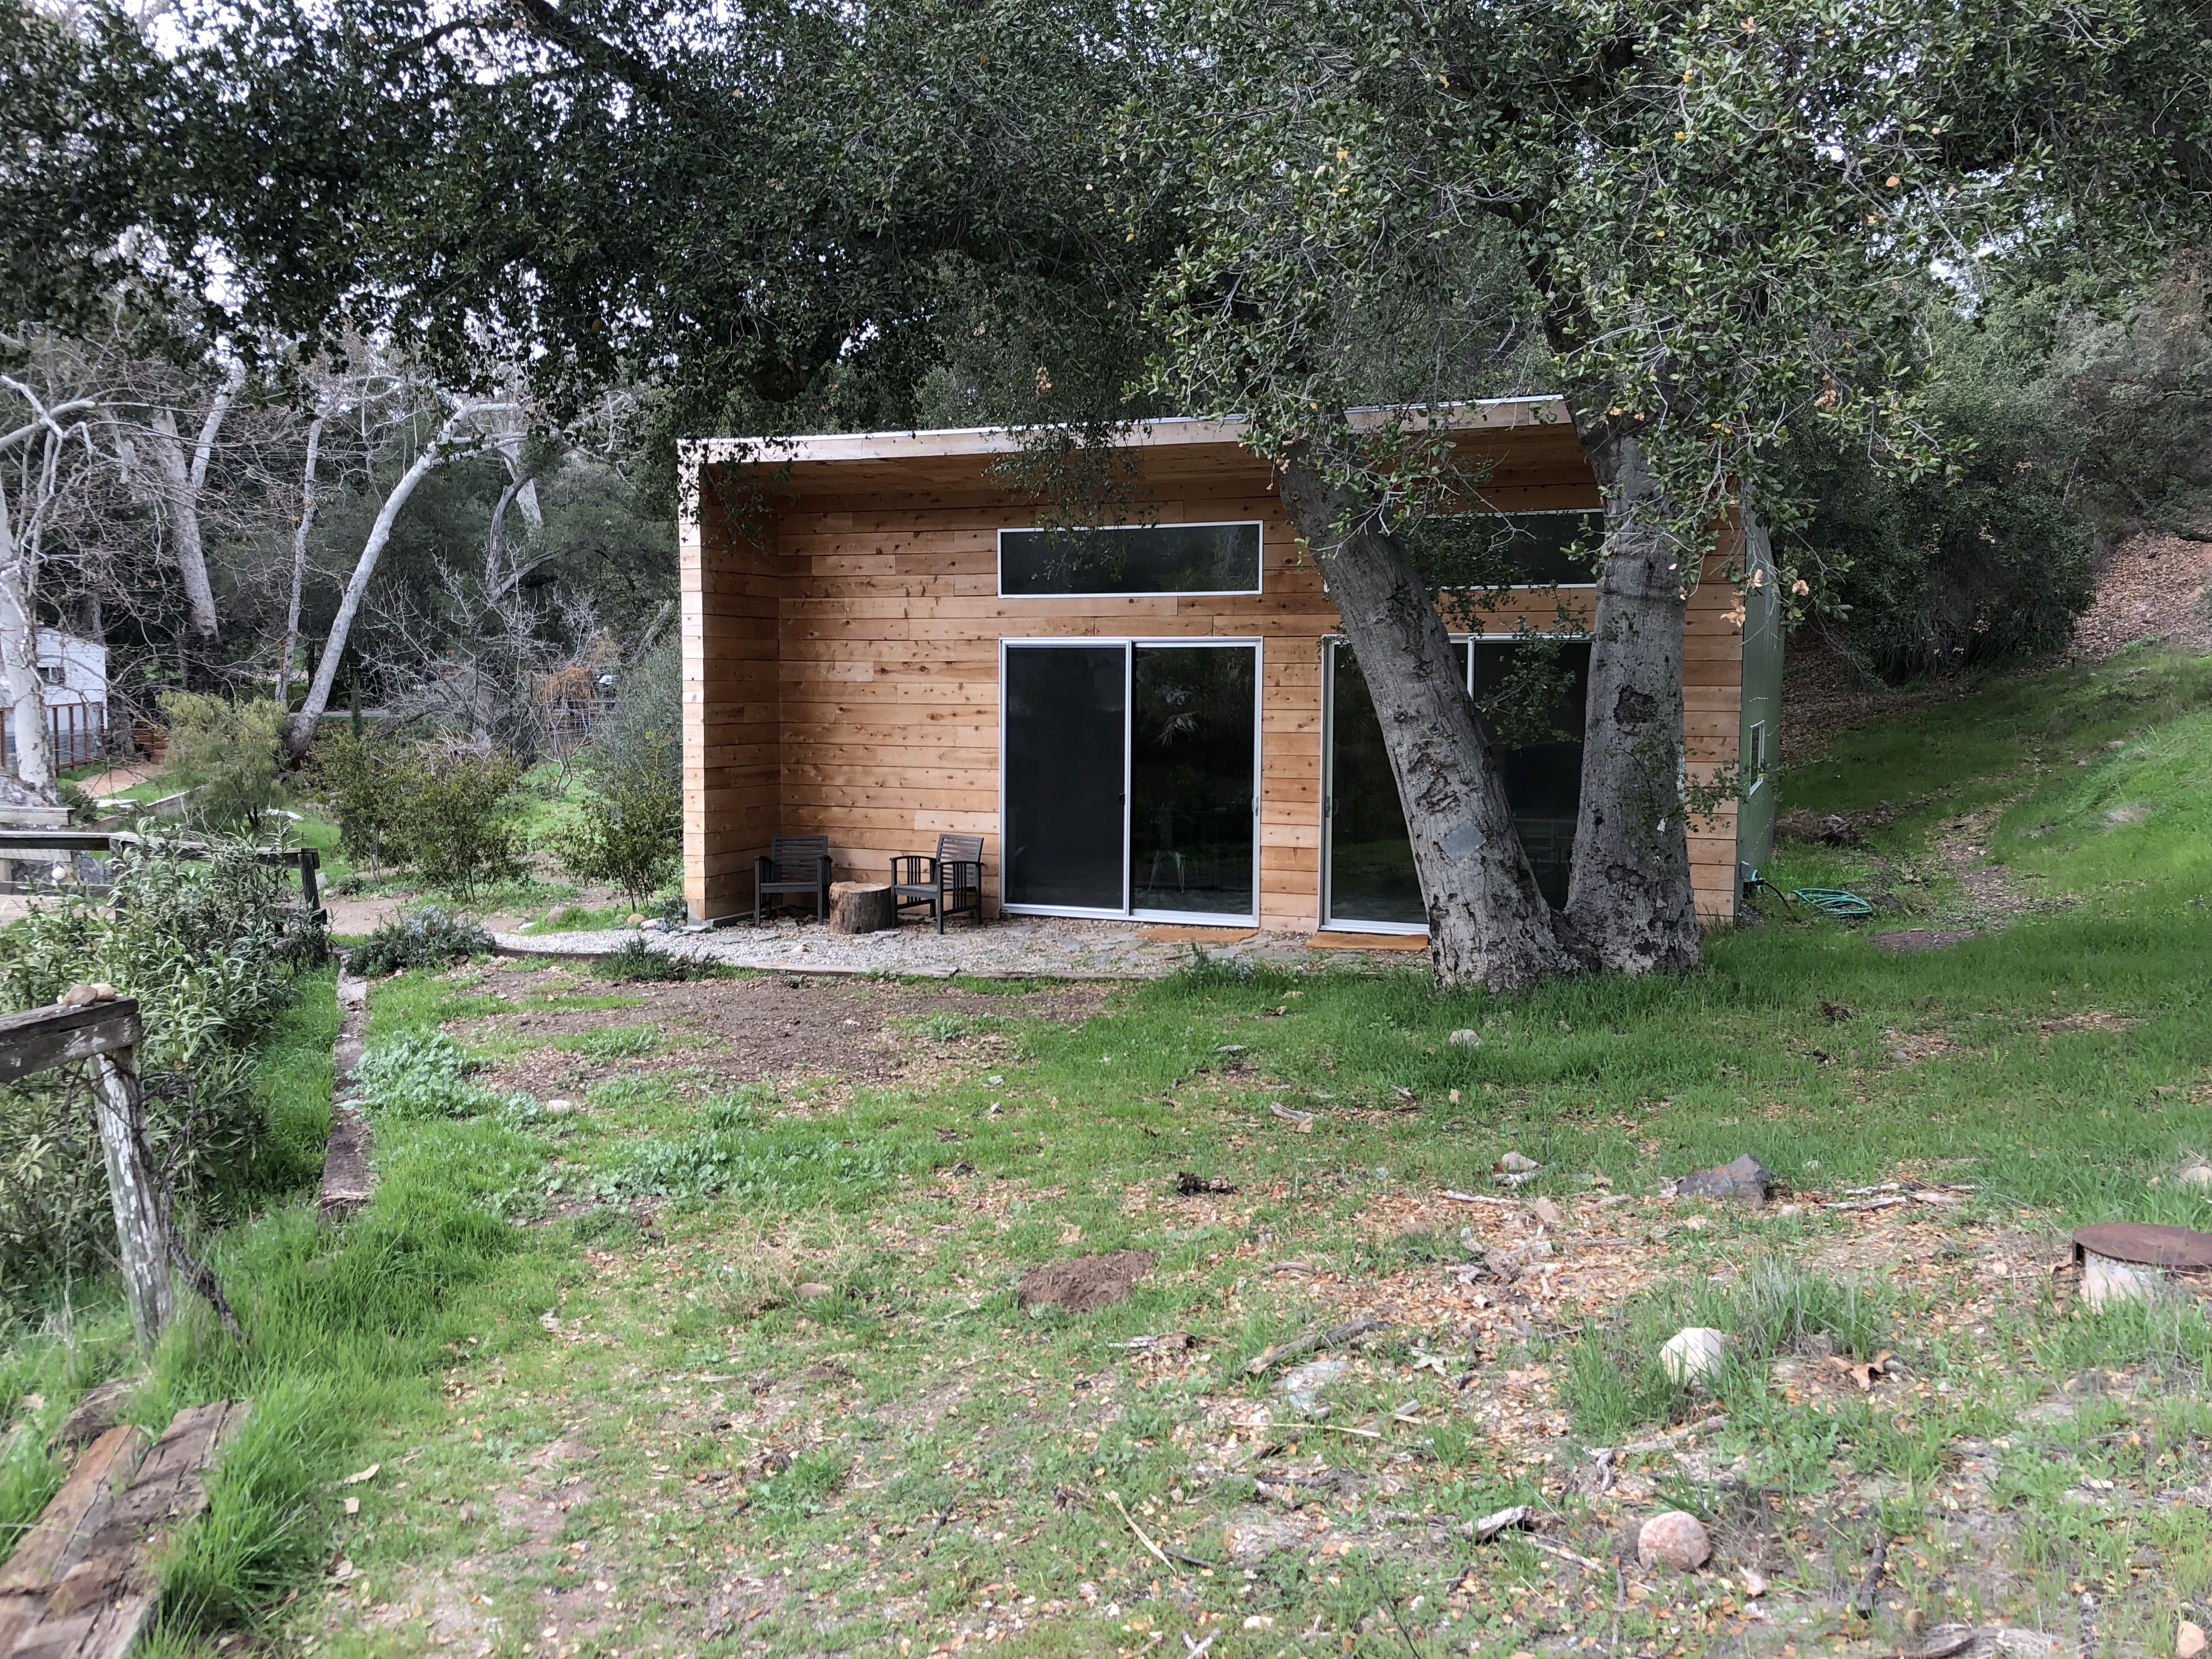 My First Airbnb, Chic House in Topanga Canyon